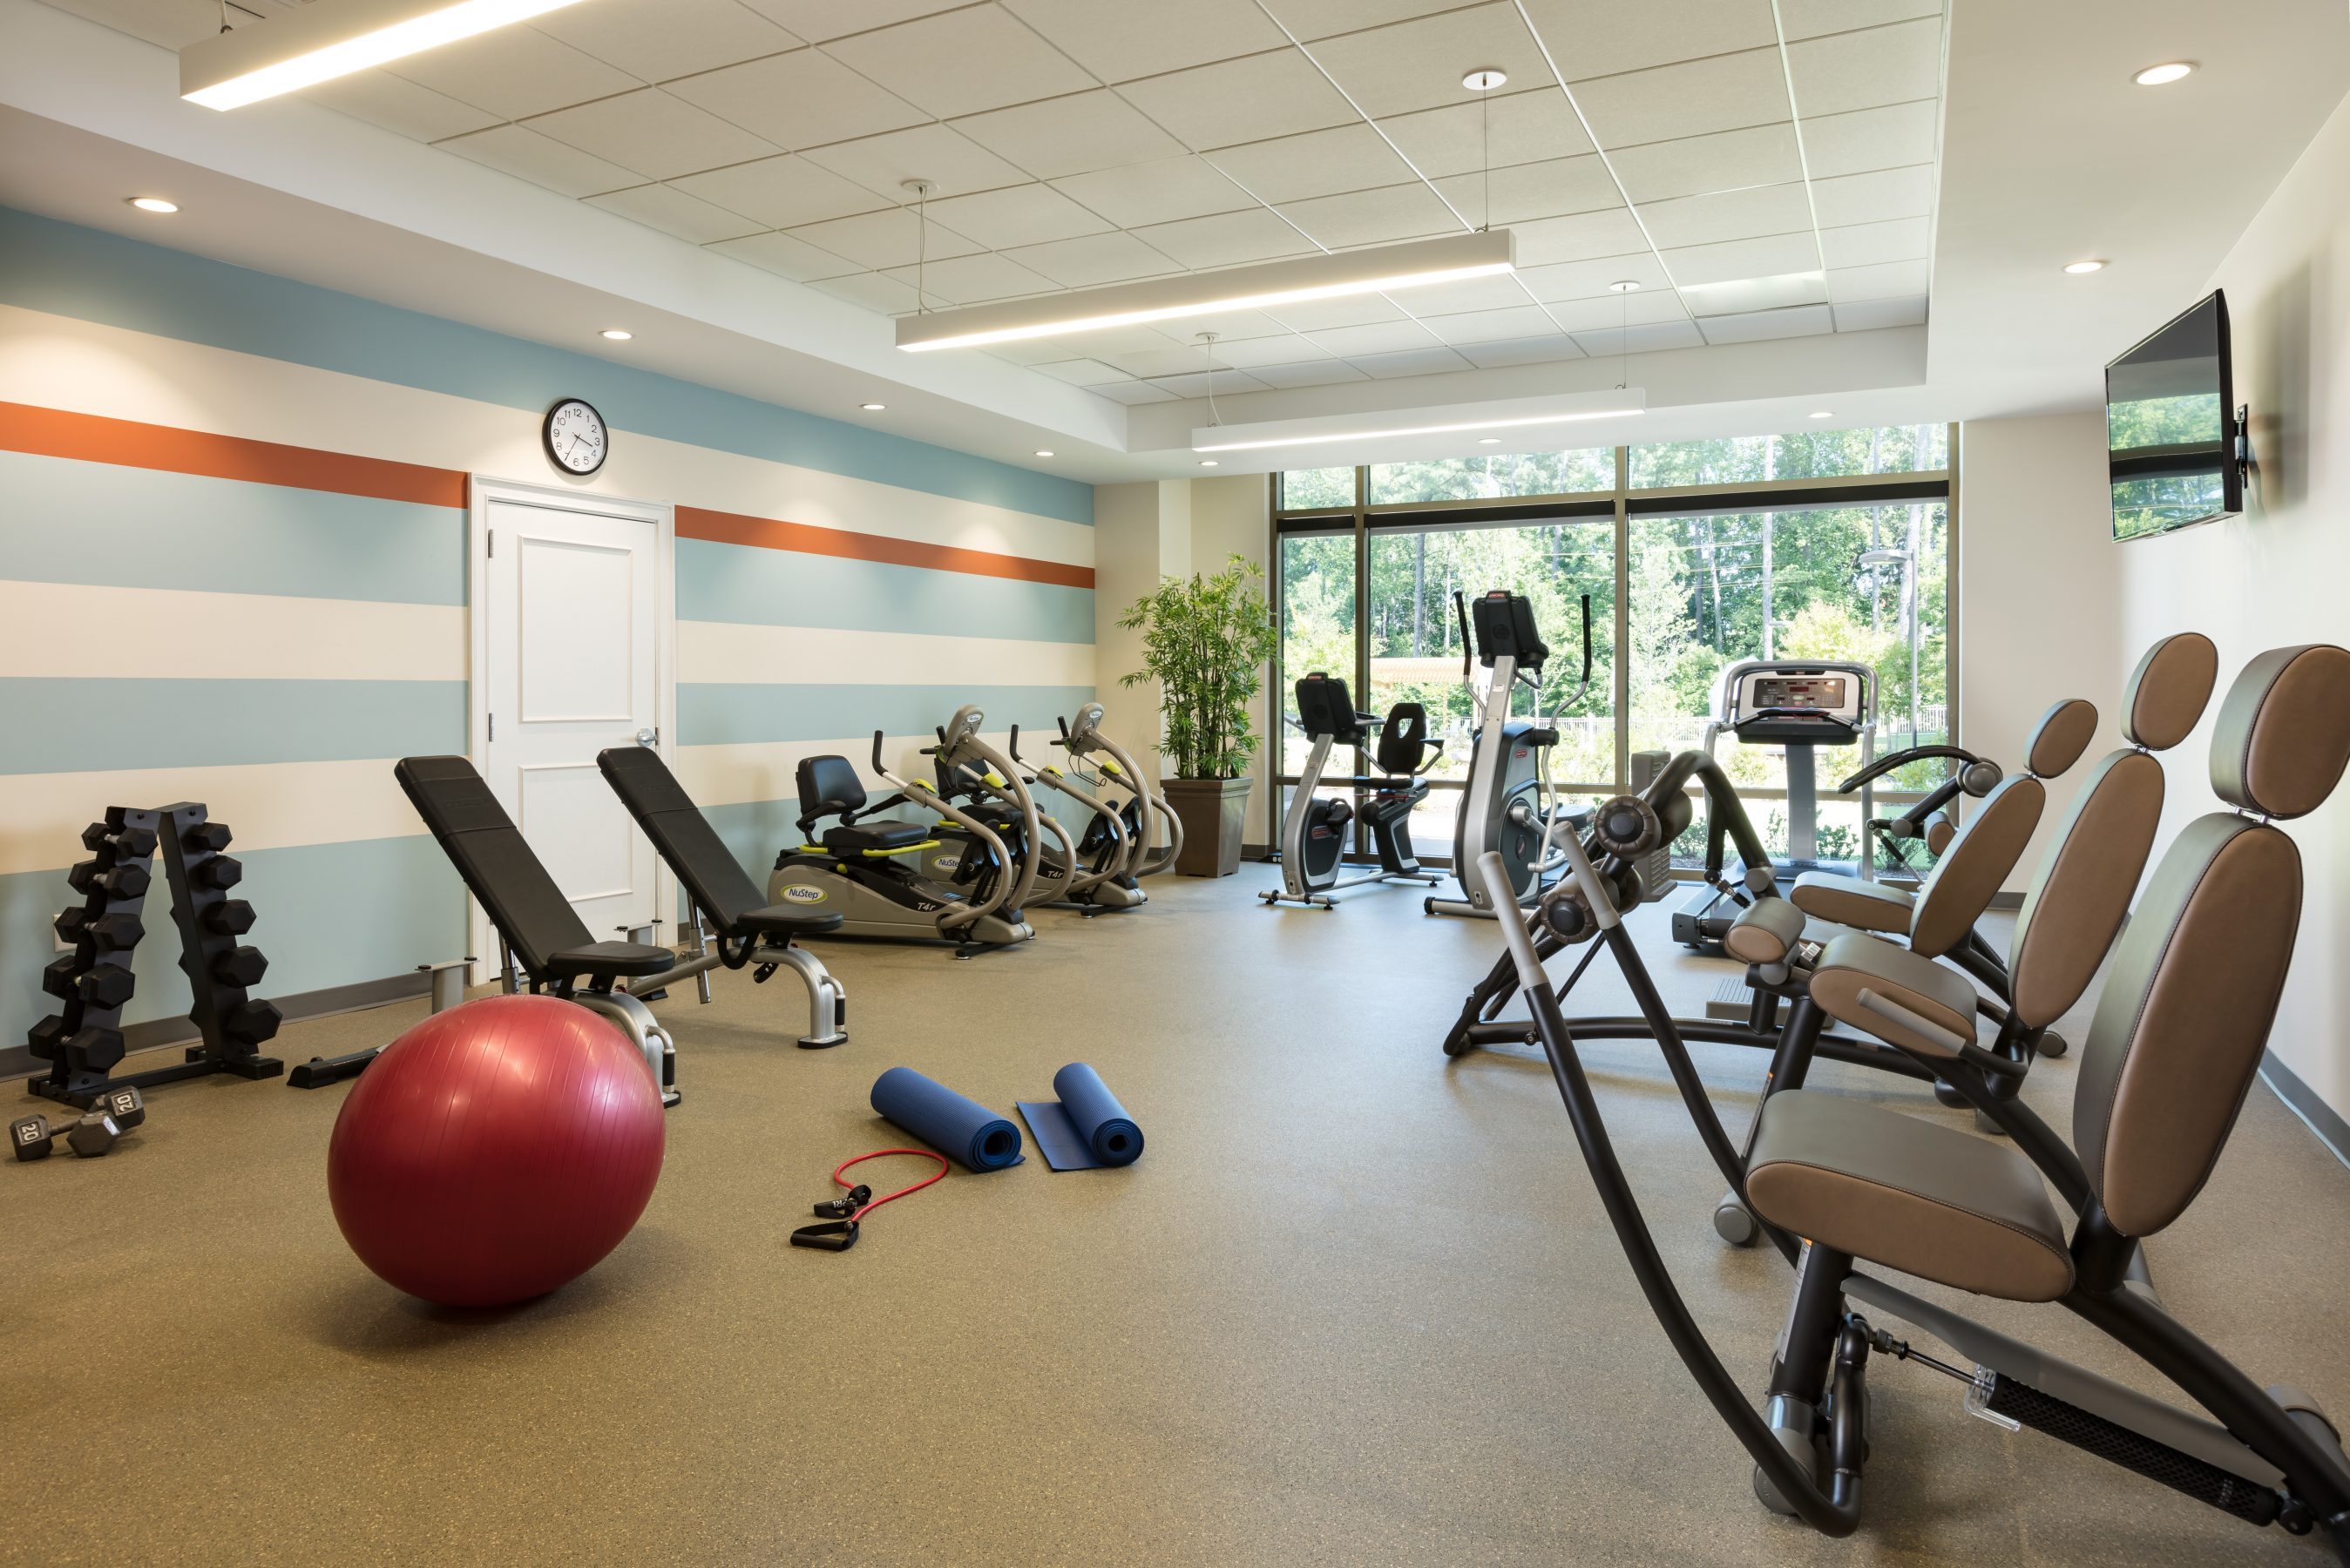 Fitness room at The Cardinal featuring weights, machines, and other workout equipment.